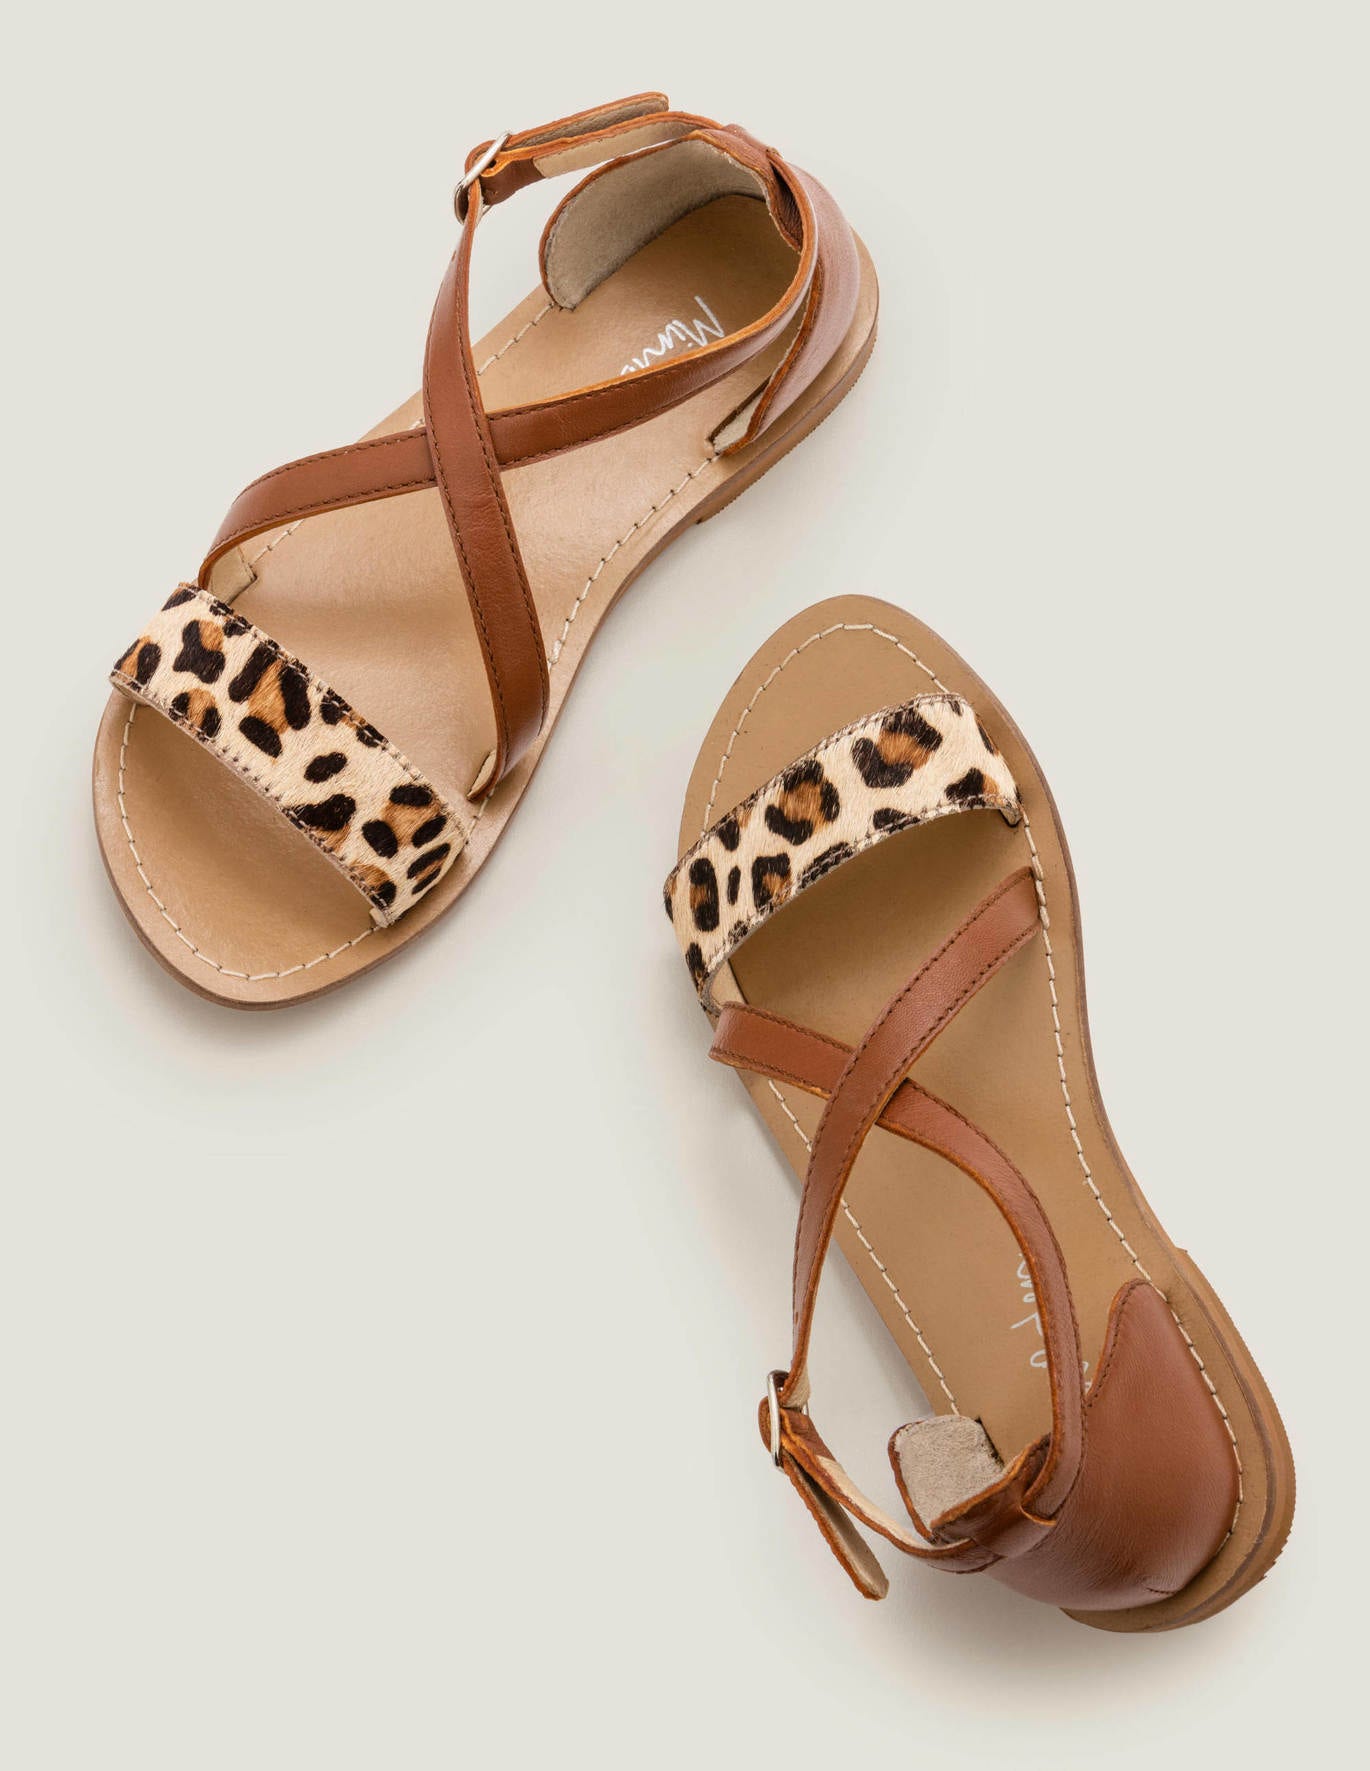 Boden Leather Crossover Sandals - Tan